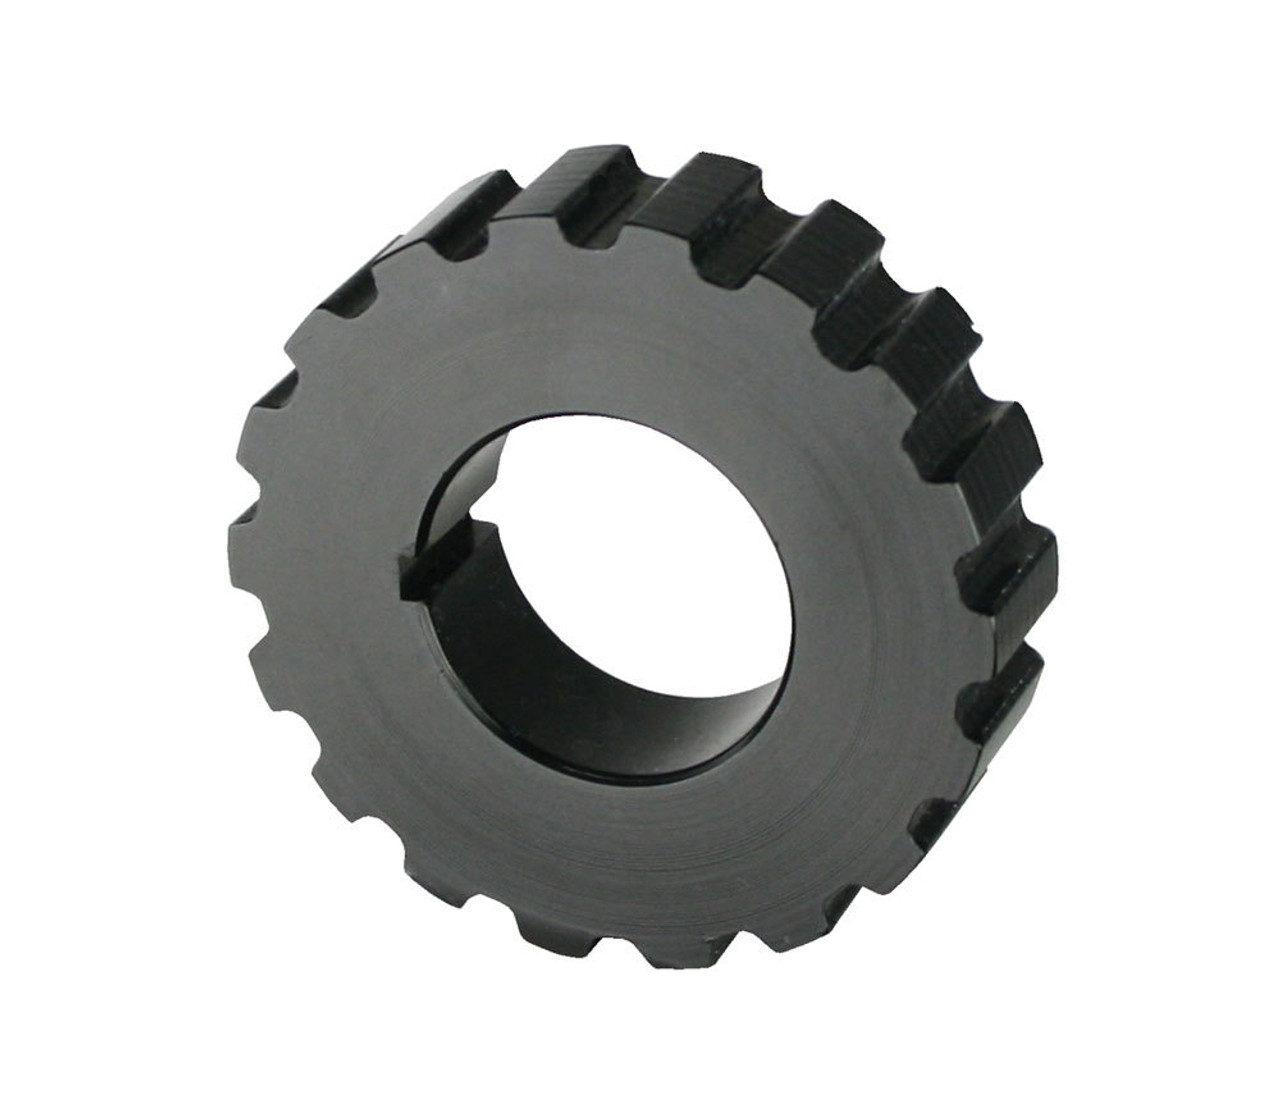 18 Tooth Gilmer Drive Crank Pulley